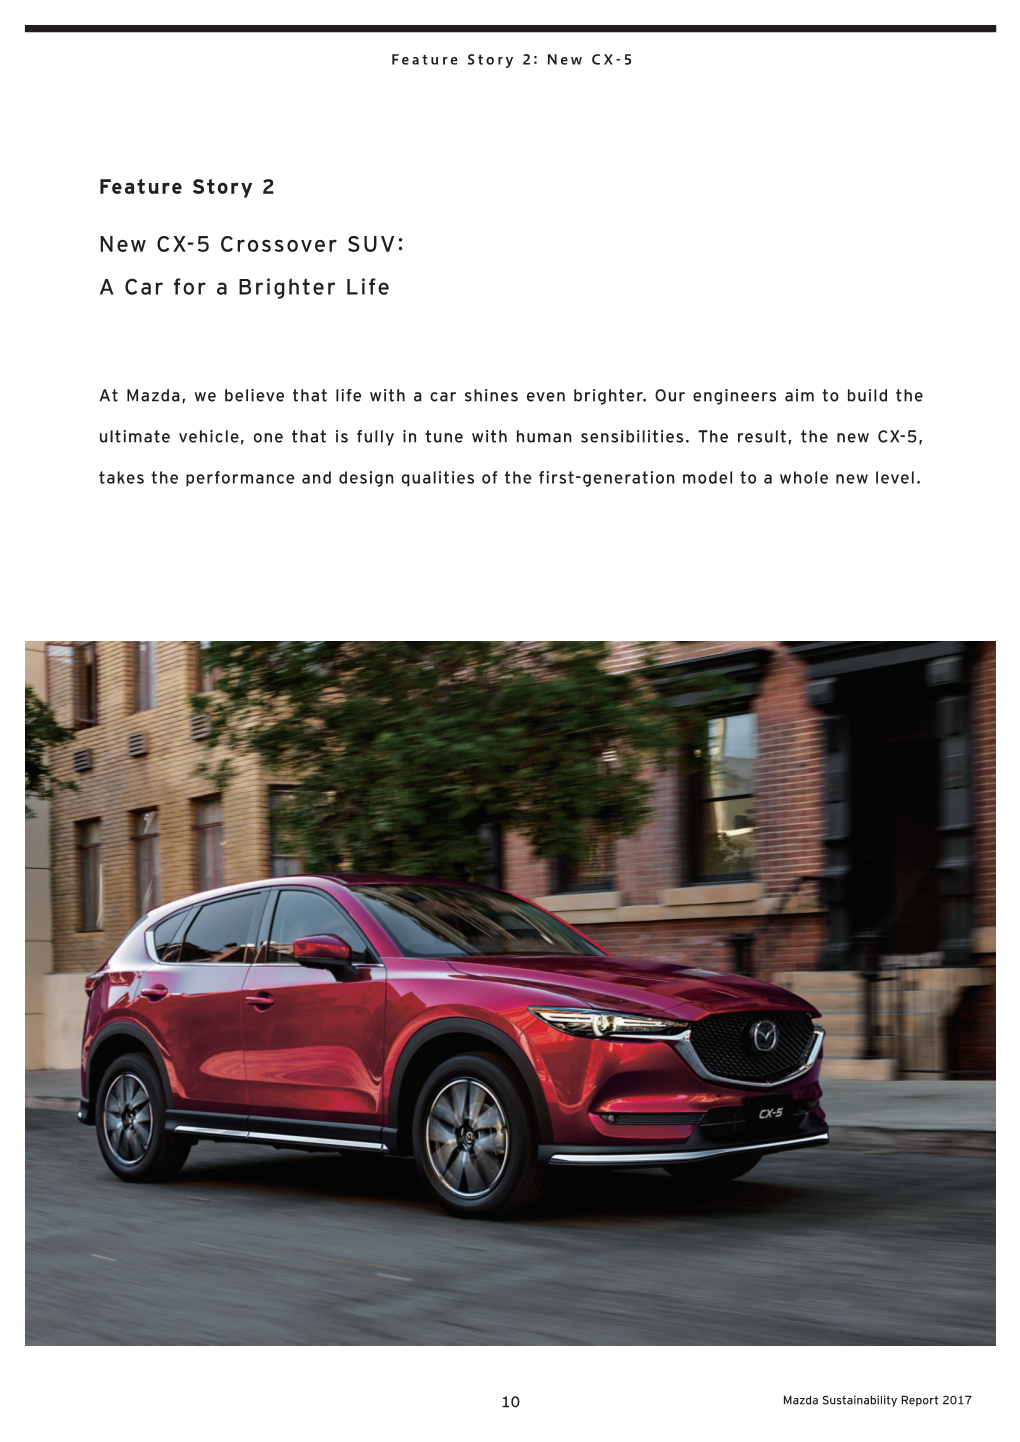 New CX-5 Crossover SUV: a Car for a Brighter Life